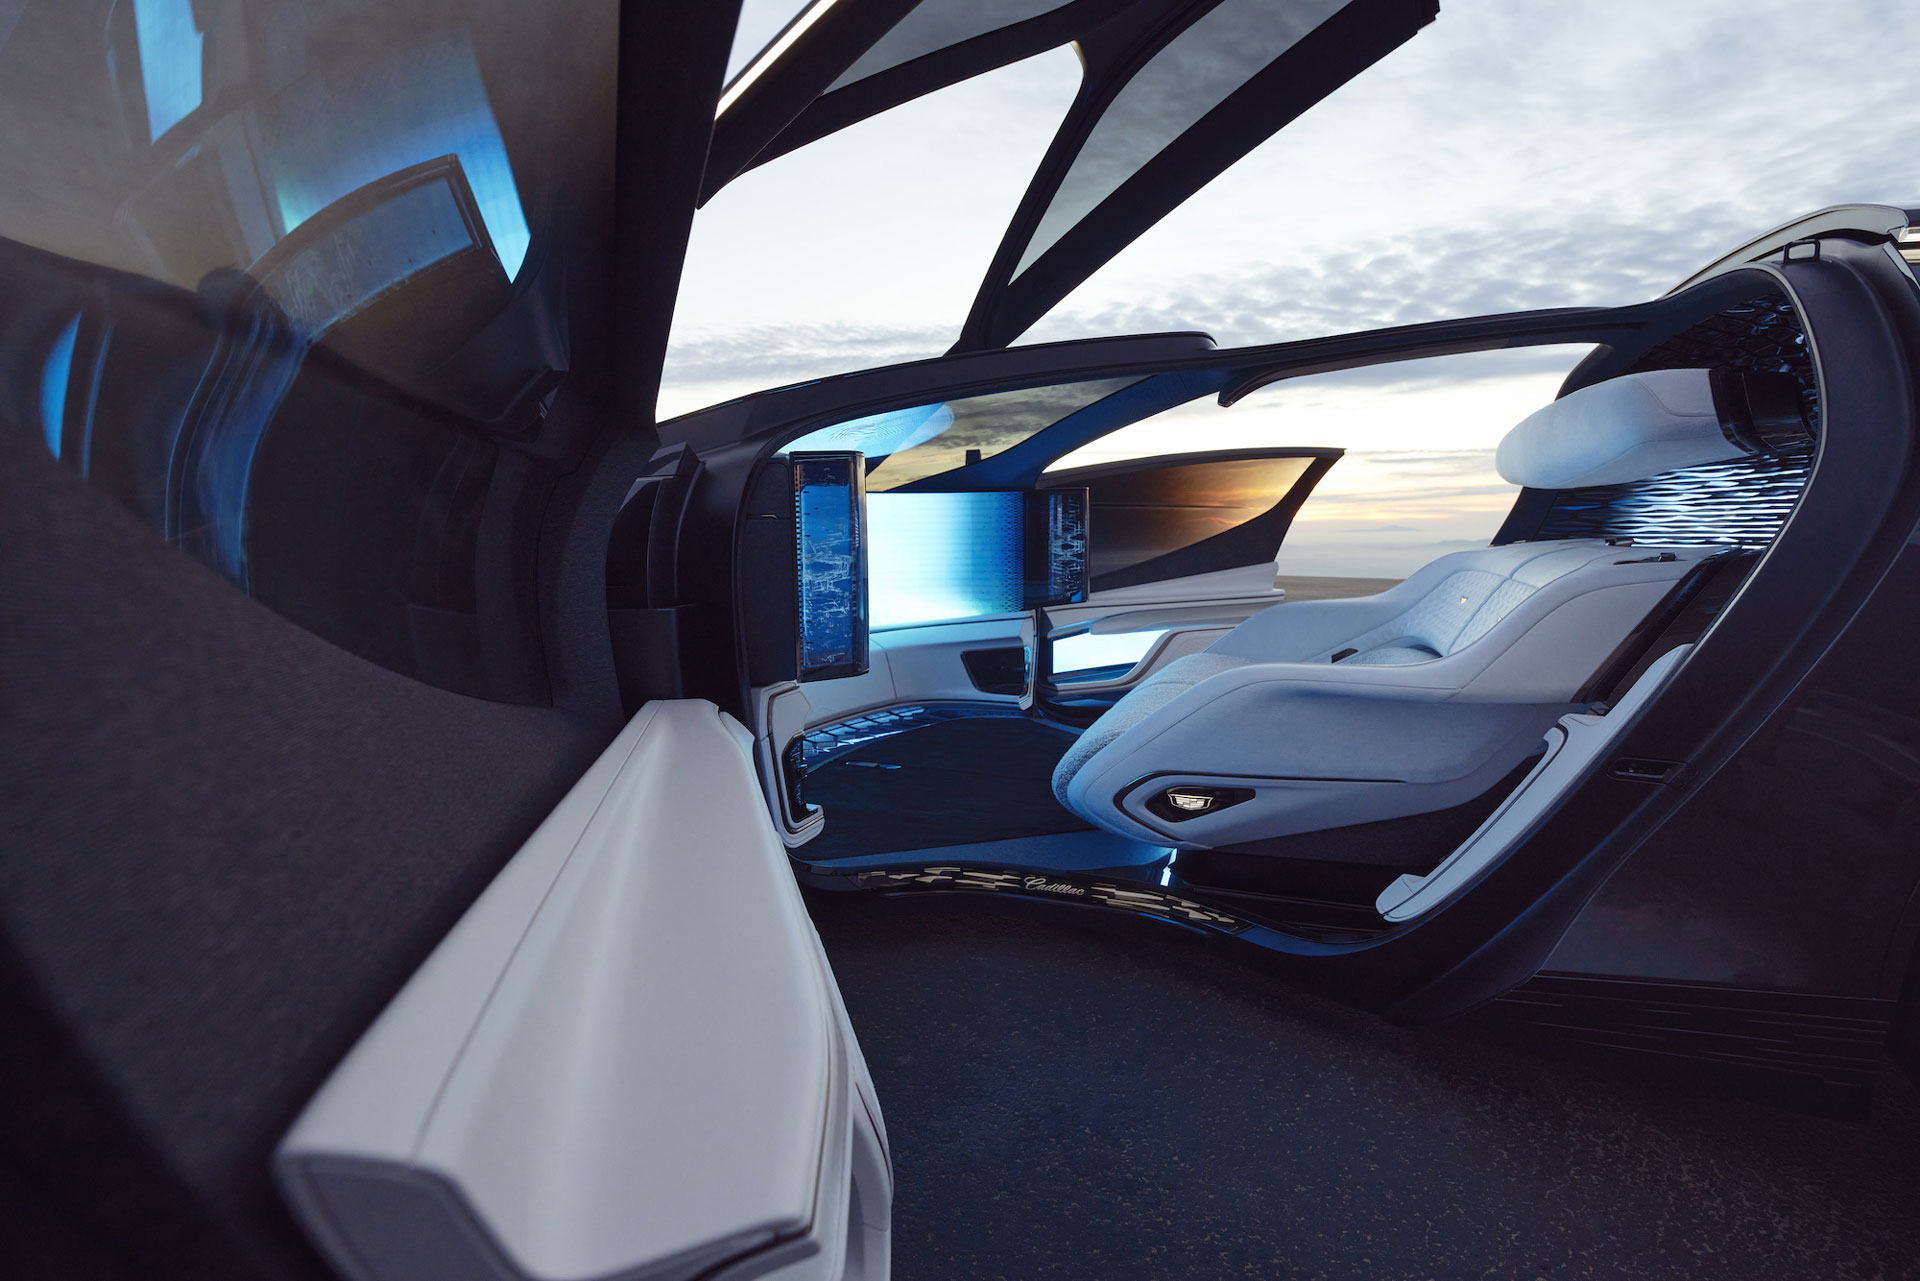 Cadillac - Be Iconic - Inner Space Concept Car